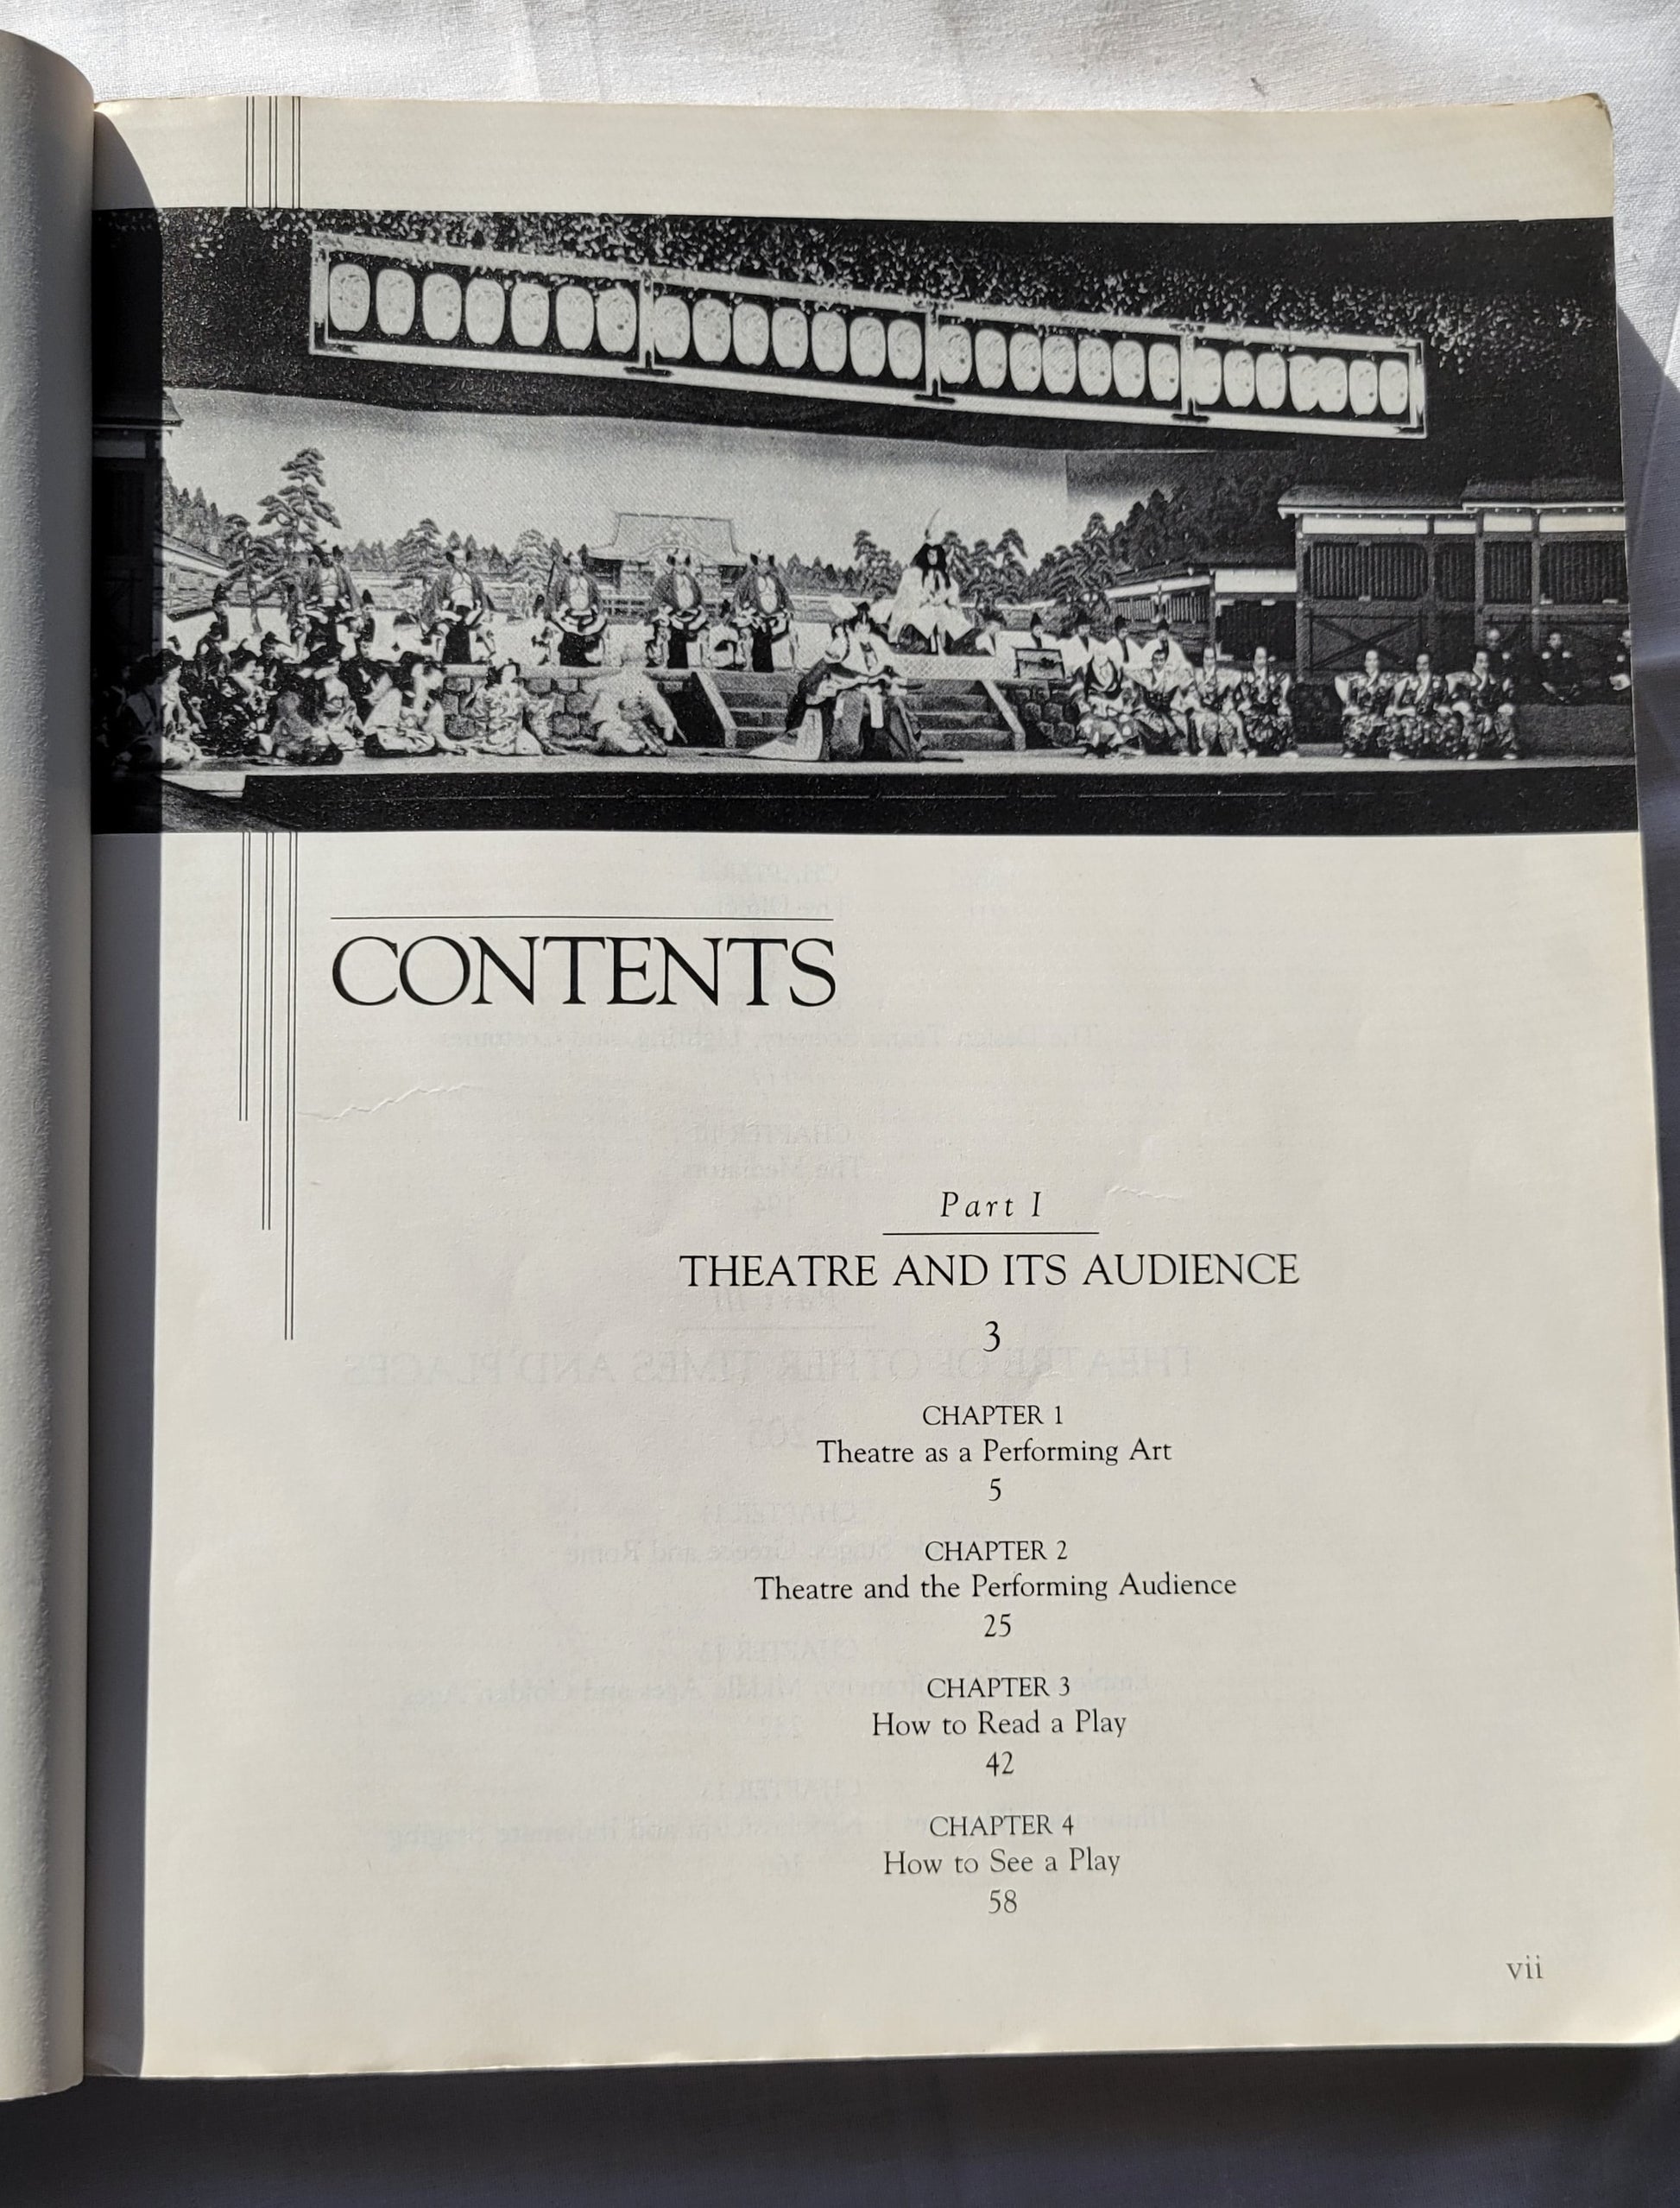 Used book for sale "The Enjoyment of Theatre: Third Edition" by Kenneth M. Cameron and Patti P. Gillespie, published by Maxwell Macmillan International in 1992. Table of contents.